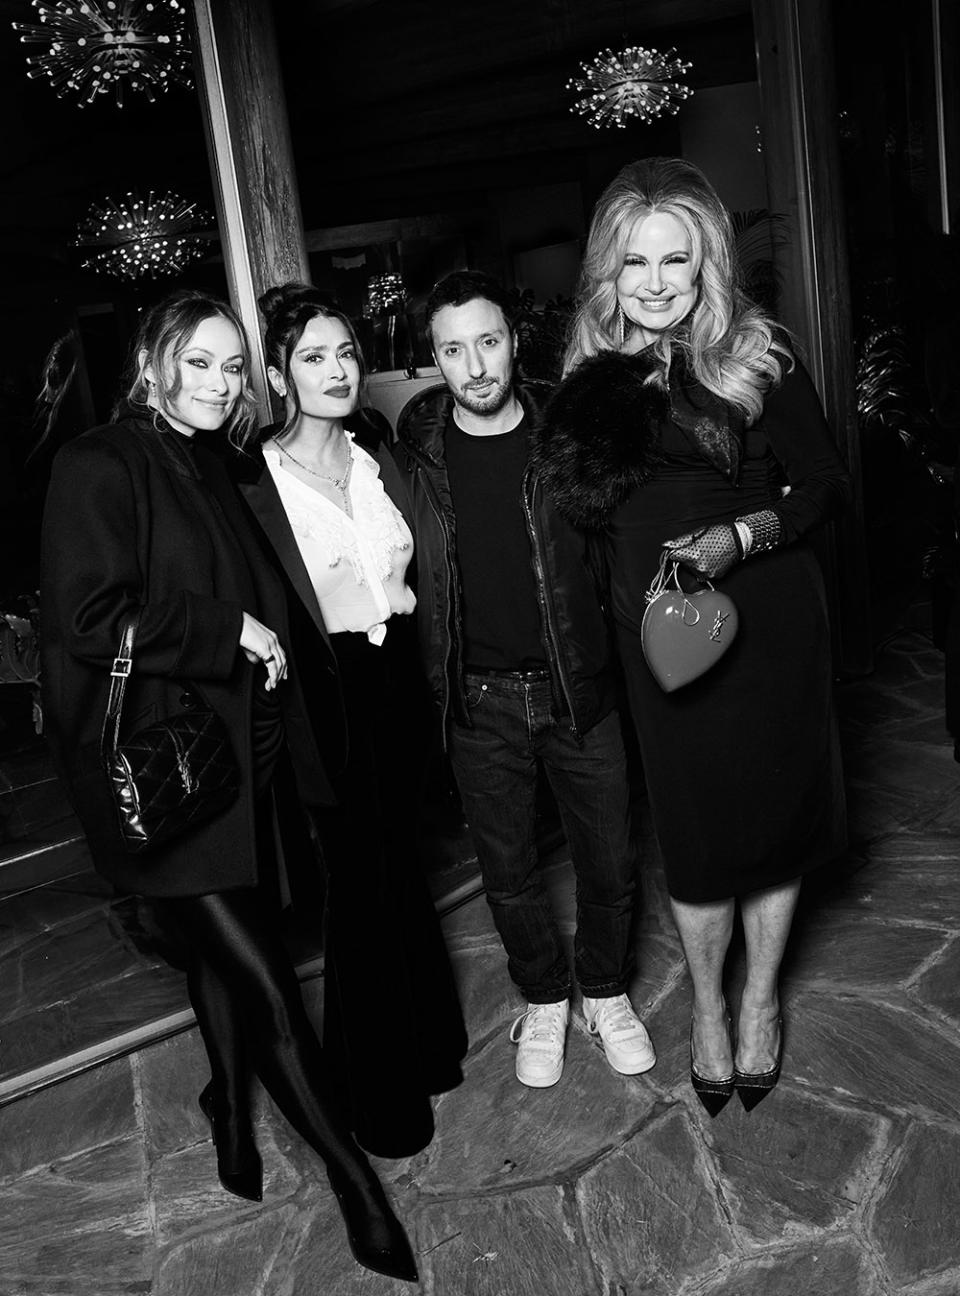 Olivia Wilde, Salma Hayek, Anthony Vaccarello and Jennifer Coolidge attend an intimate dinner hosted by W editor-in-chief Sara Moonves and Saint Lauren creative director Anthony Vaccarello at a private residence in Los Angeles on March 9, 2023.